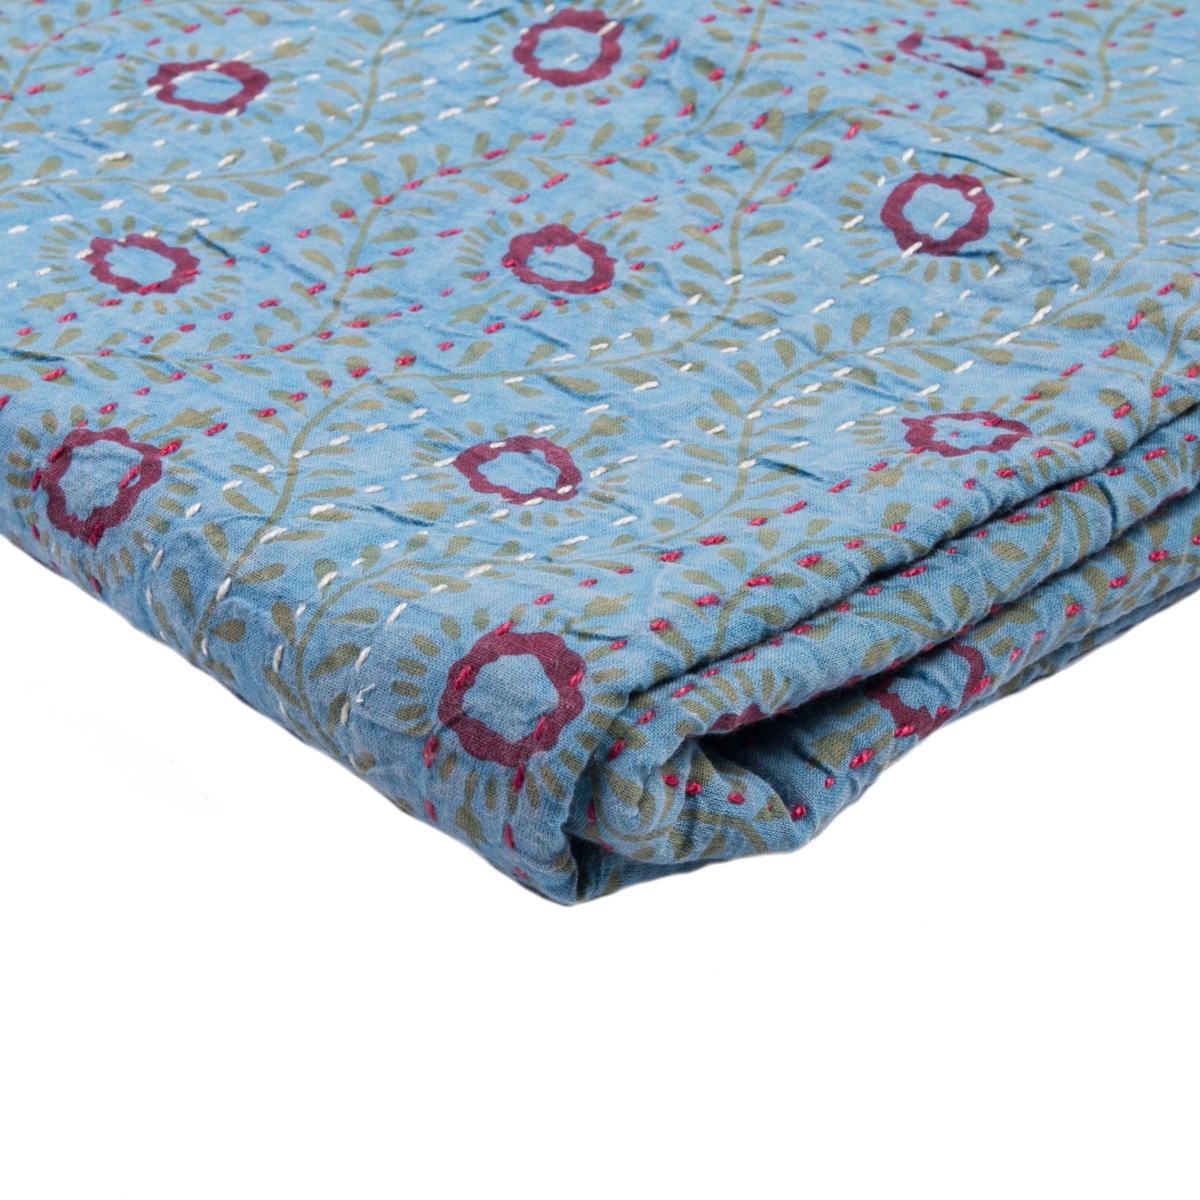 Home Roots Beddings 332346 Kantha Cotton Throw - 1117-no.43, Multicolor - 50 X 70 In.